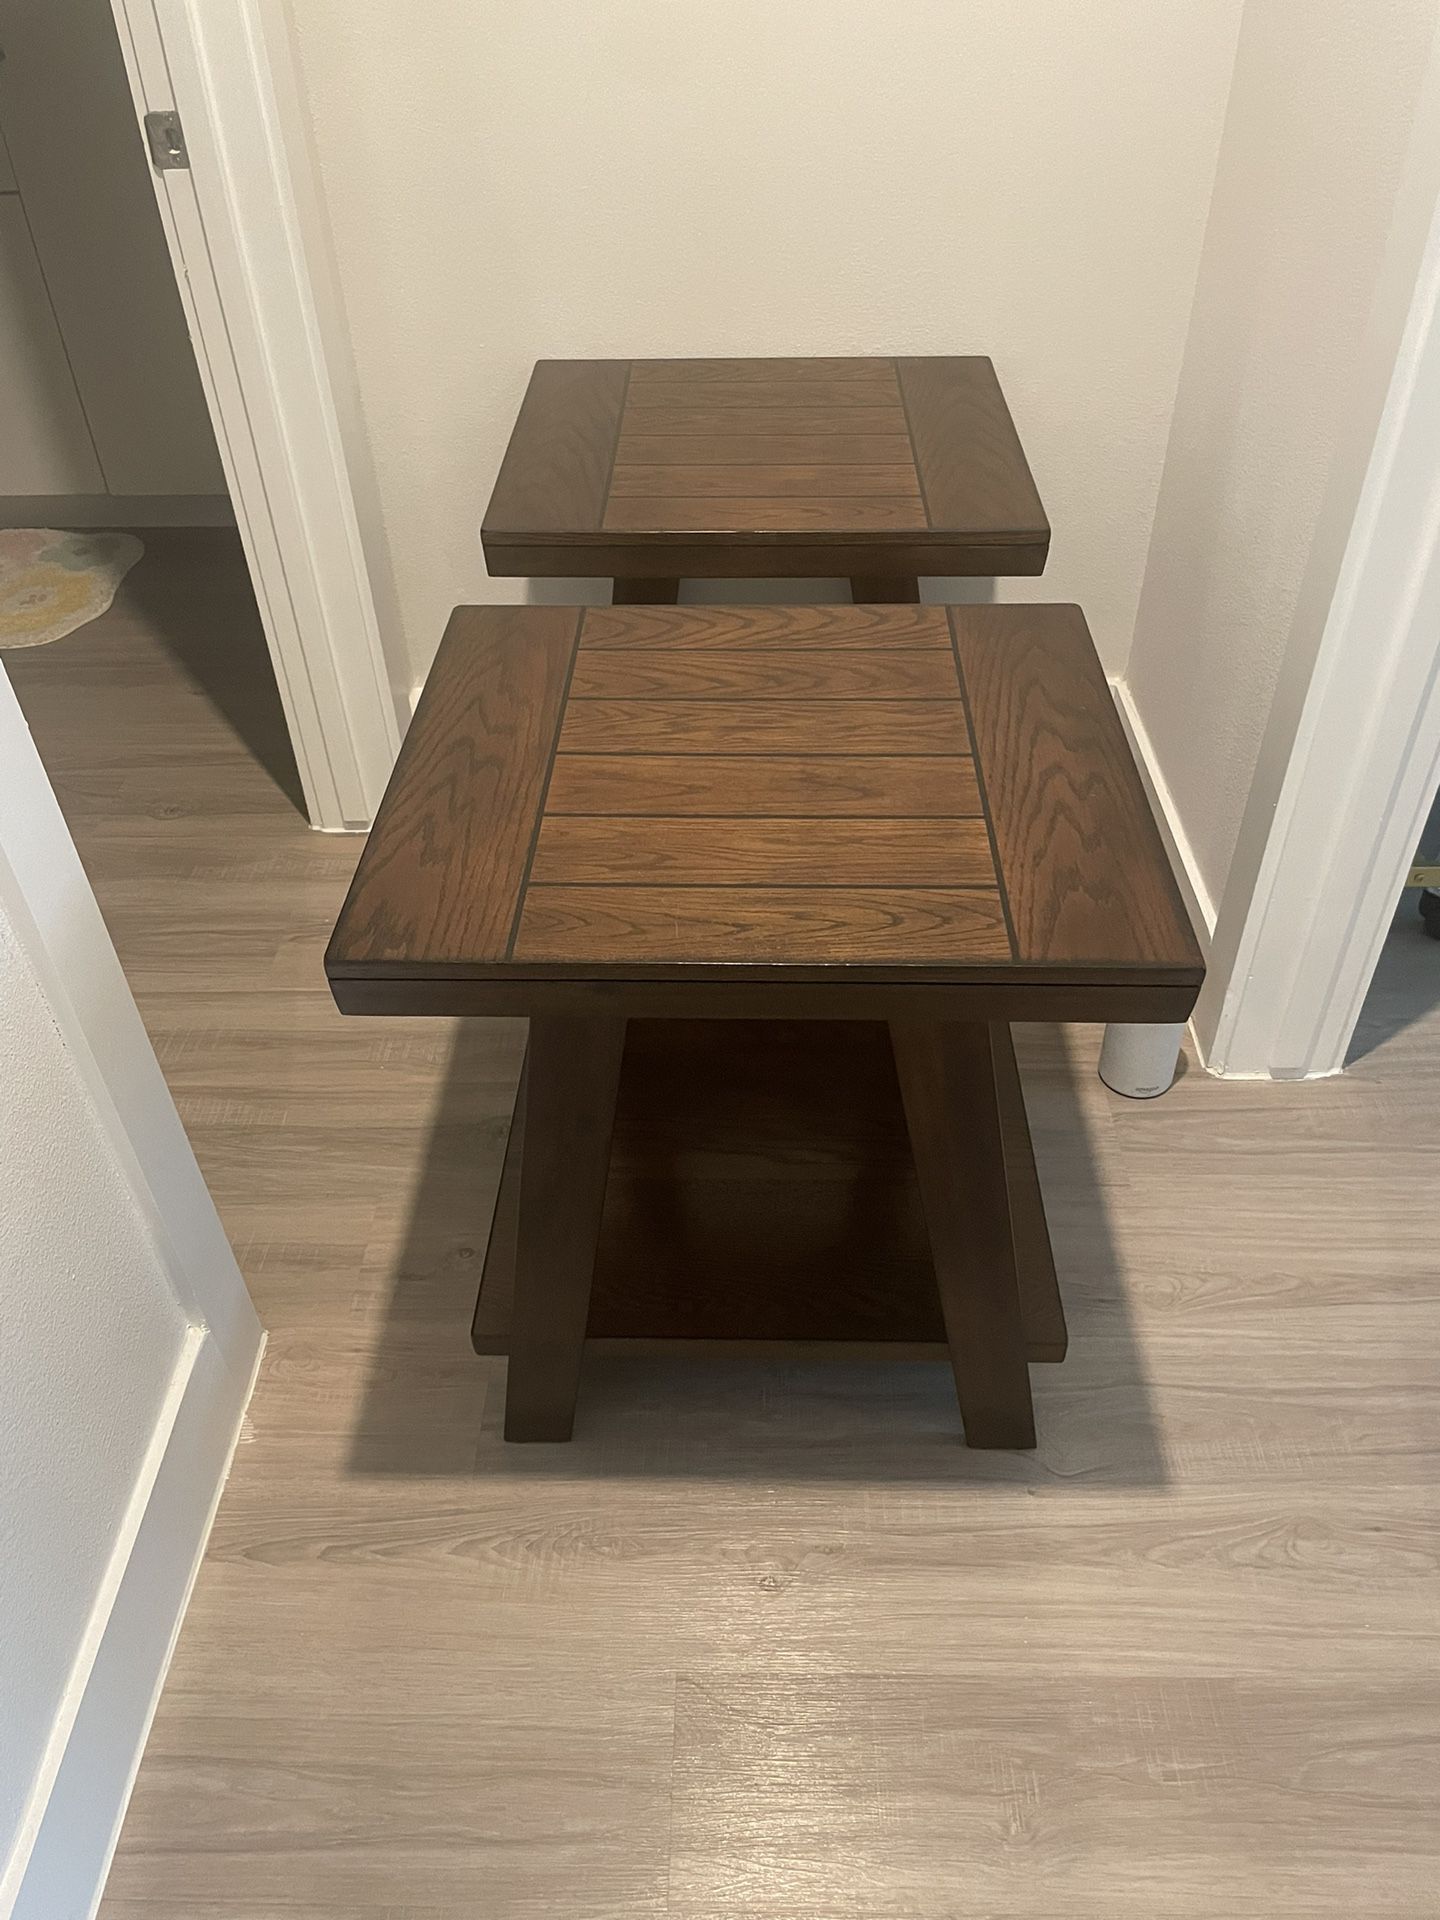 2 End Tables For Living Room 